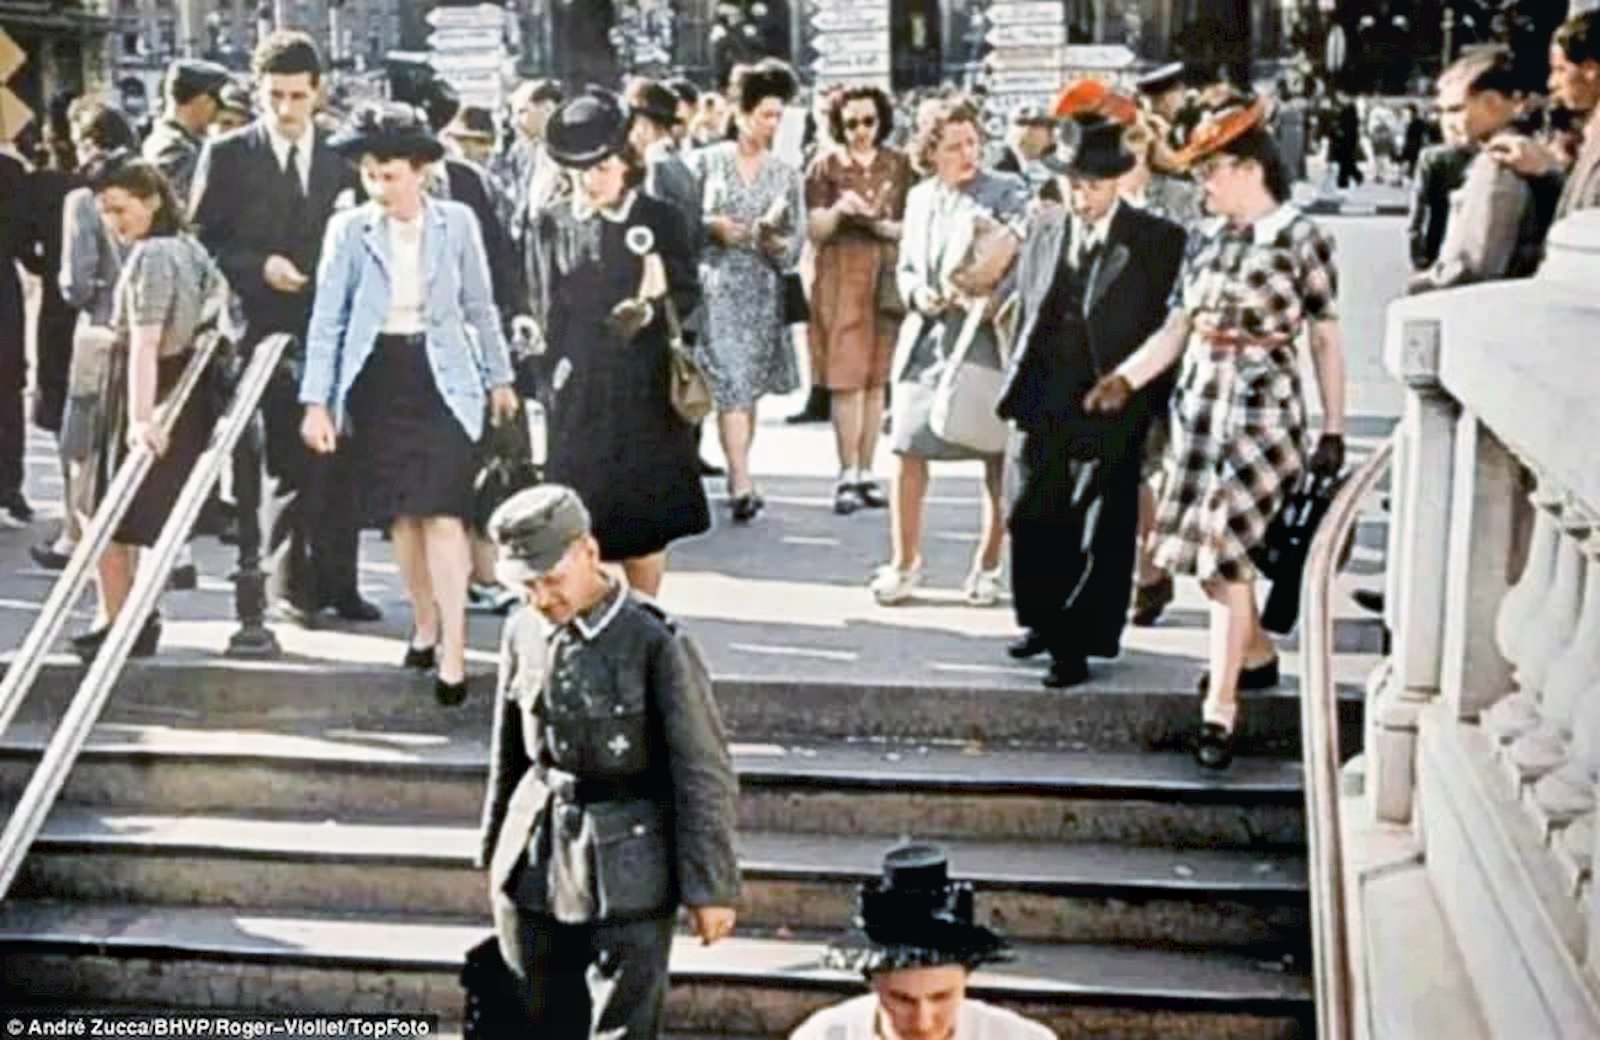 Historians say images such as this one of a Nazi soldier walking freely with Parisians was designed to show the world France was happy under occupation.